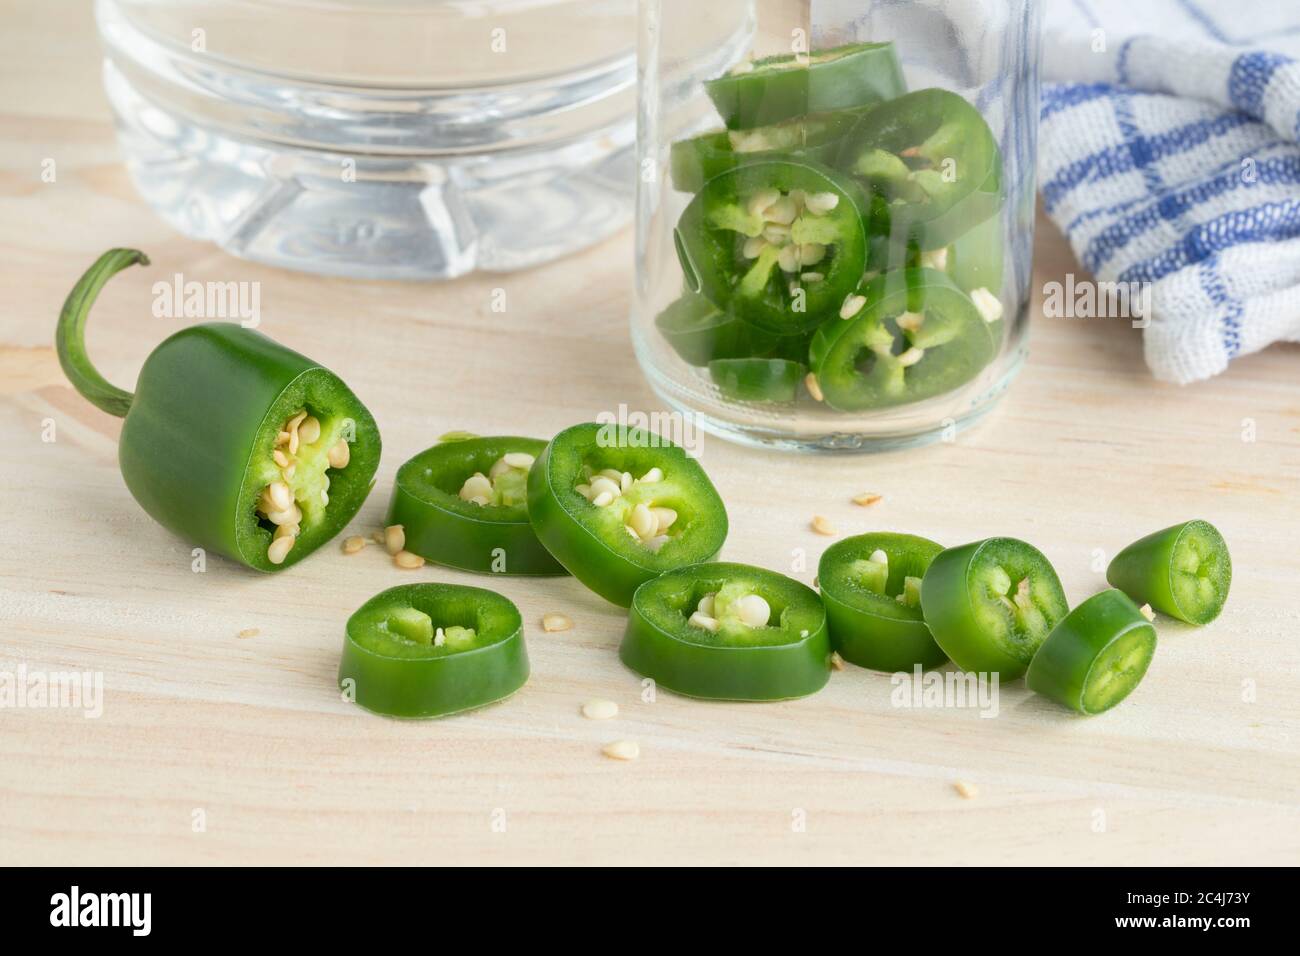 Fresh green jalapeno peppers cut into slices to pickle in vinegar Stock Photo